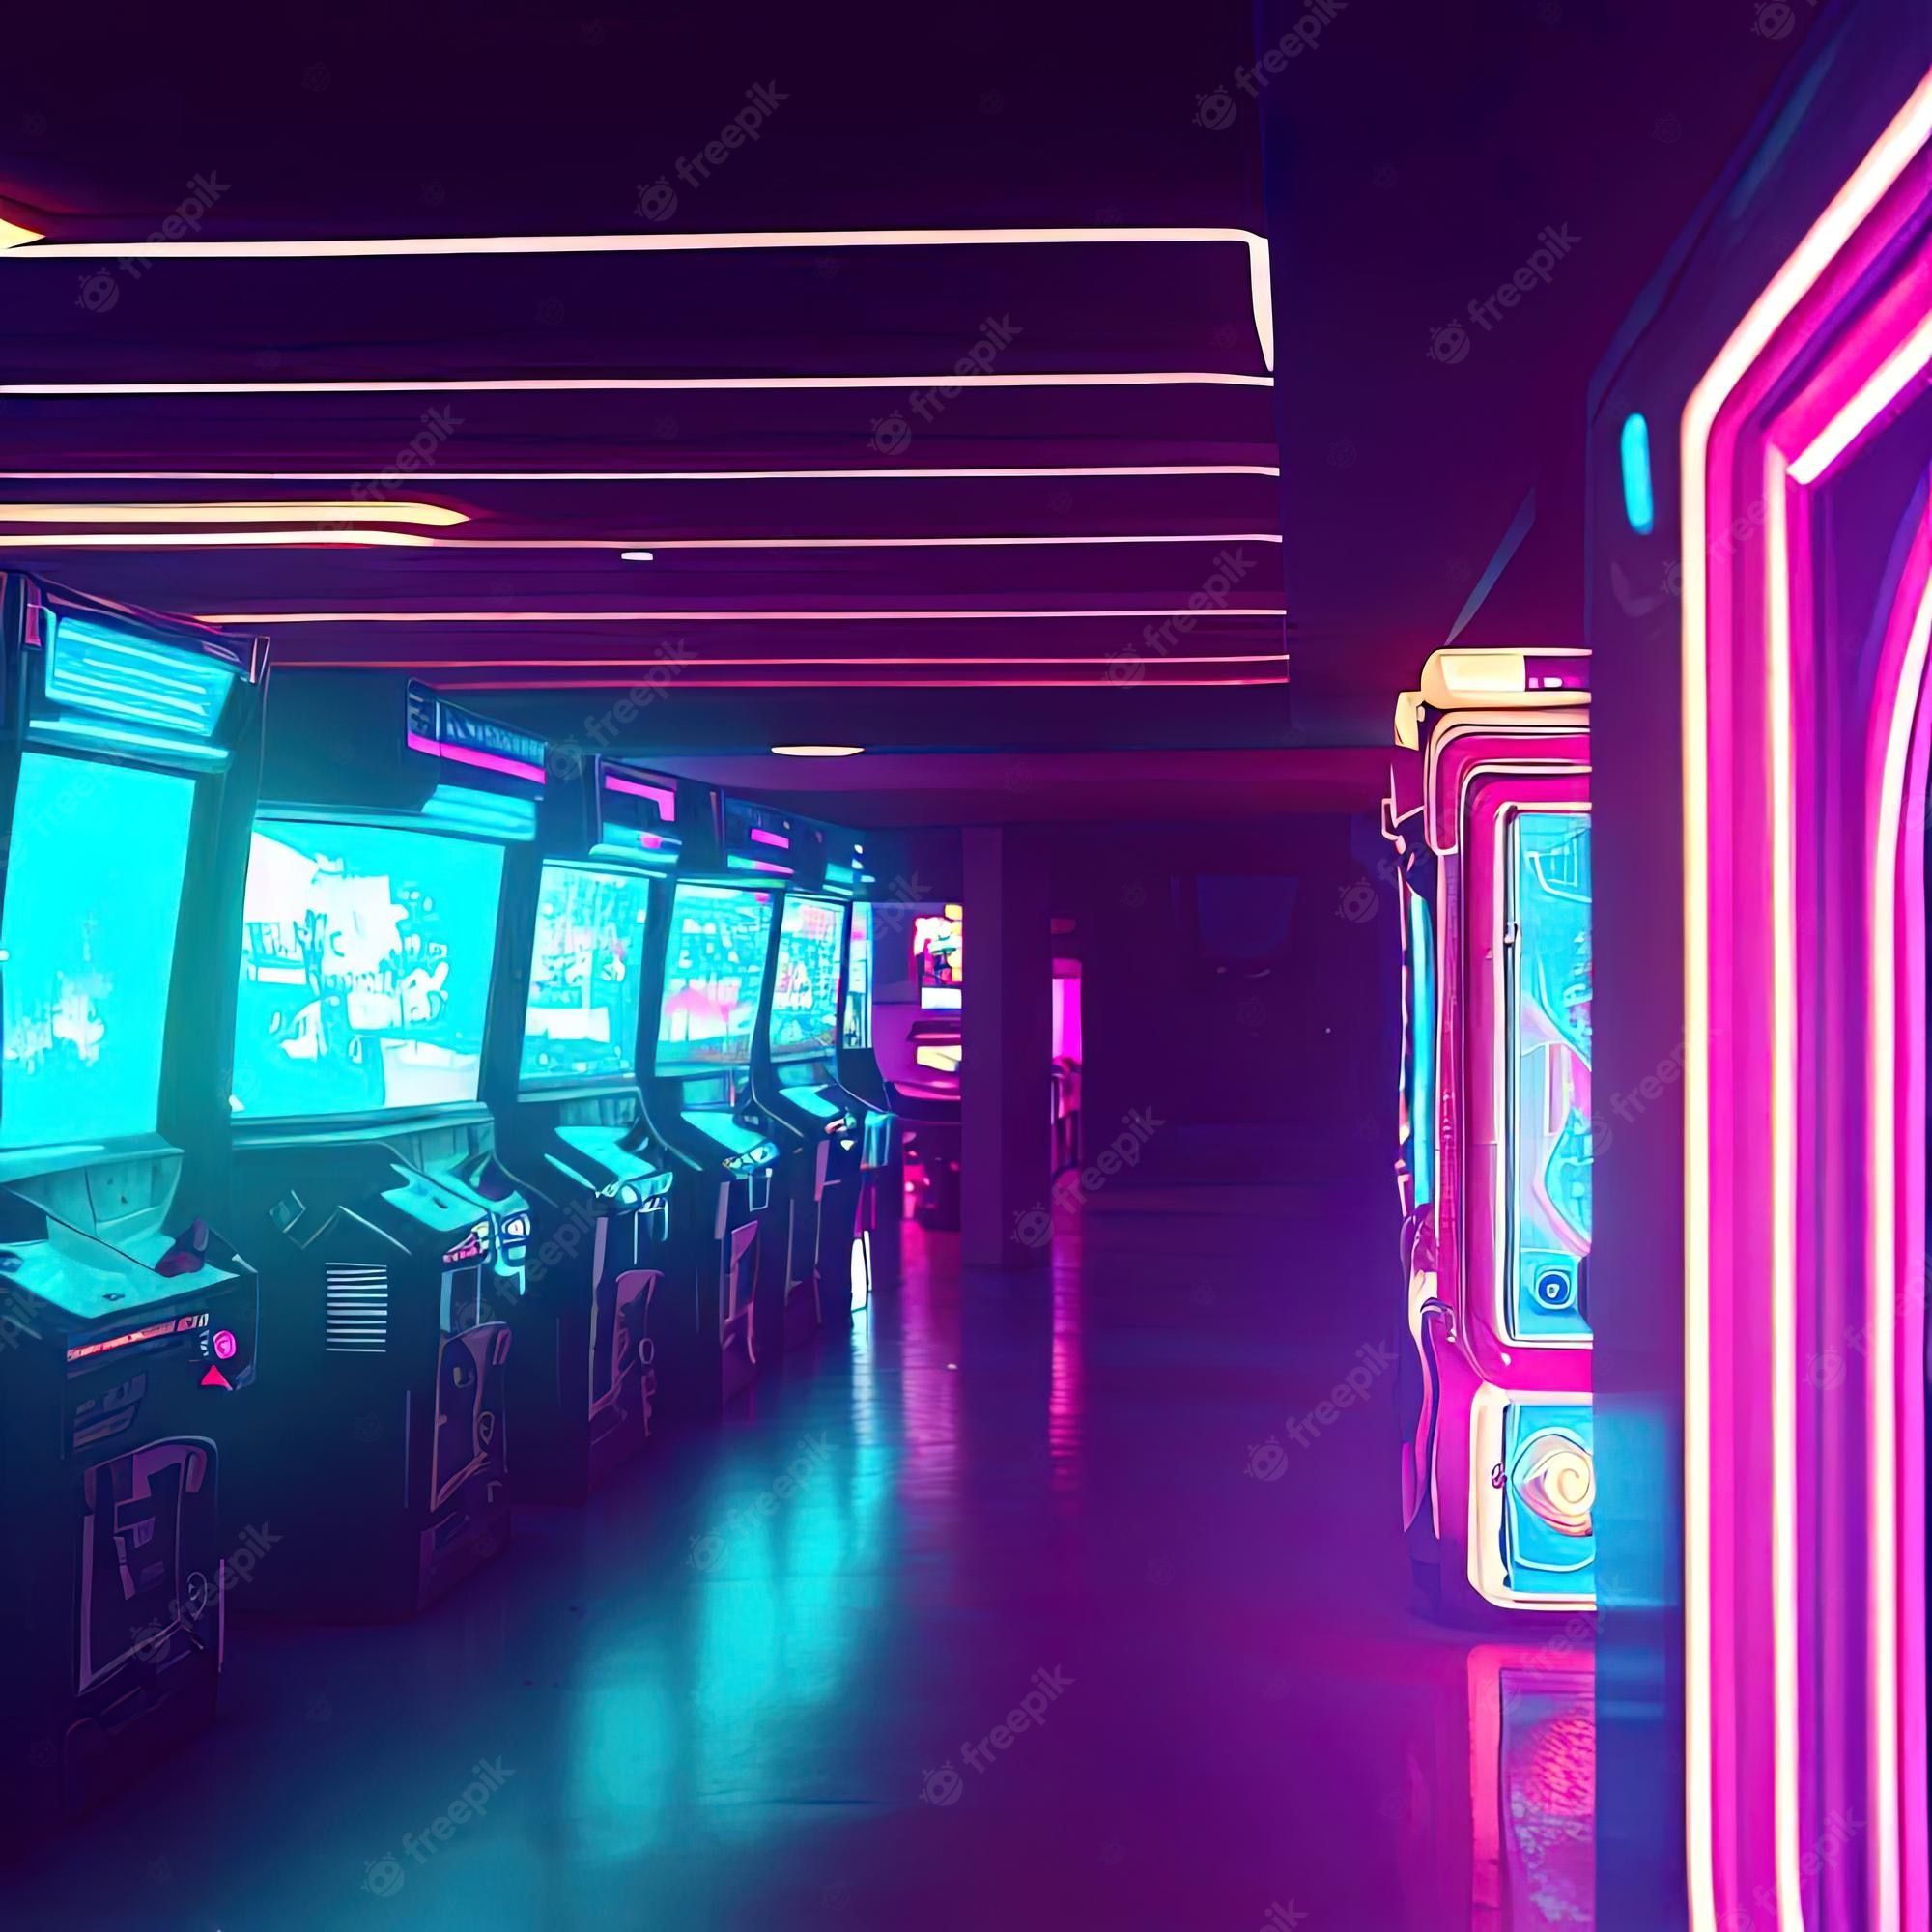 A row of gaming machines in a dark room lit by neon lights - Arcade